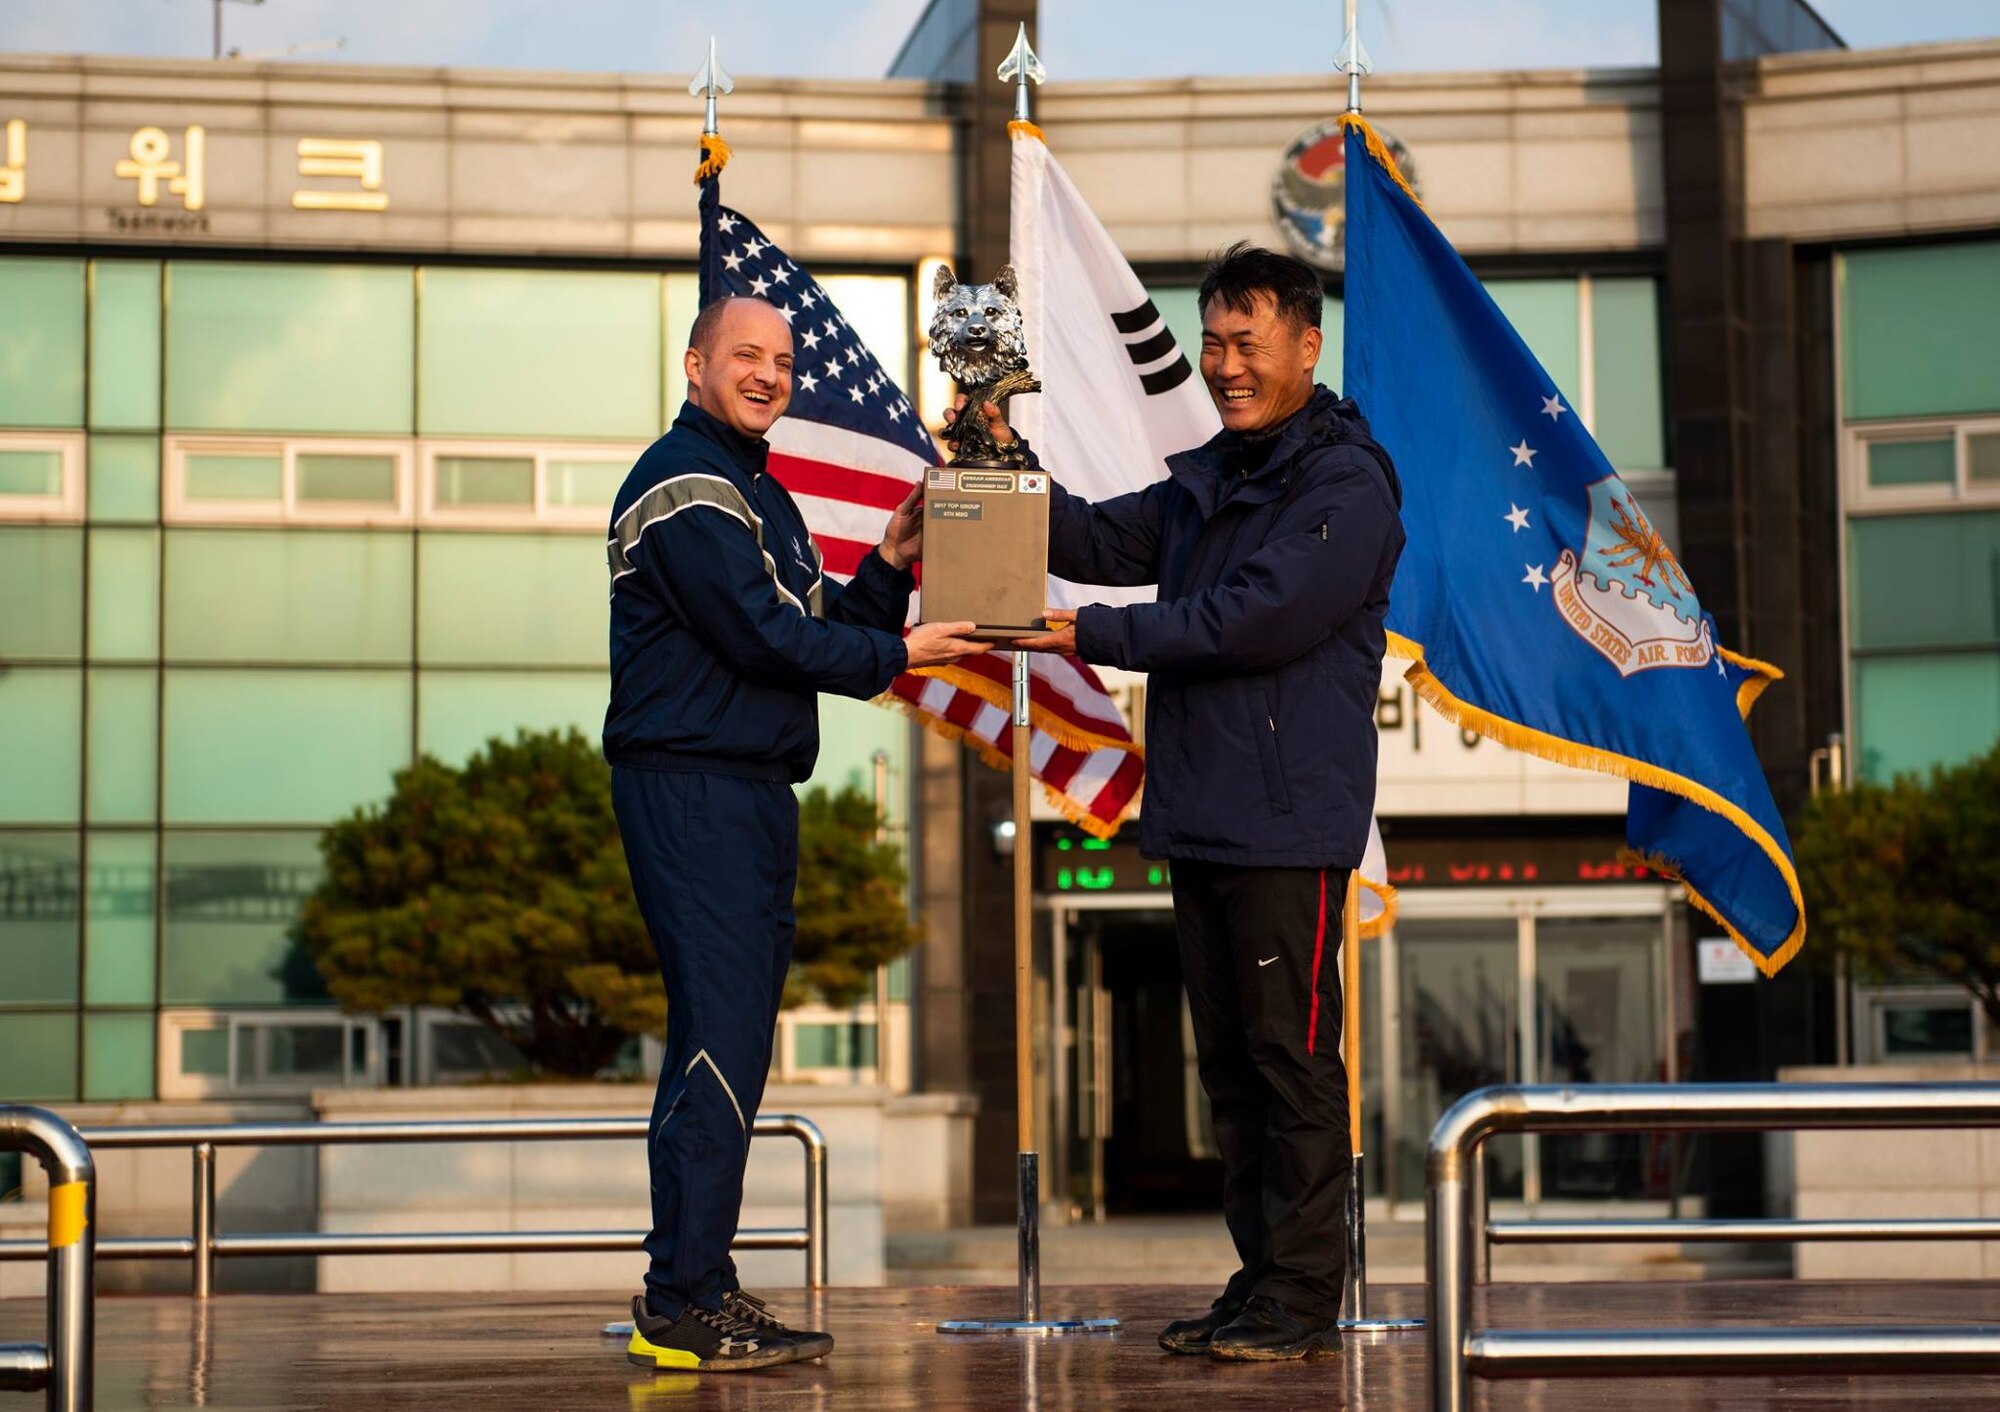 Col. John Bosone, 8th Fighter Wing commander (left), presents Col. Jae-Gyun Jeon, 38th Fighter Group commander (right), with the 2018 US-ROKAF Friendship Day trophy at Kunsan Air Base, Republic of Korea, Nov. 9, 2018. The US-ROKAF Friendship Day focused on celebrating the partnership and alliance between the 8th FW and 38th FG, who participated in several sporting events and competitions throughout the day. (U.S. Air Force photo by Senior Airman Stefan Alvarez)